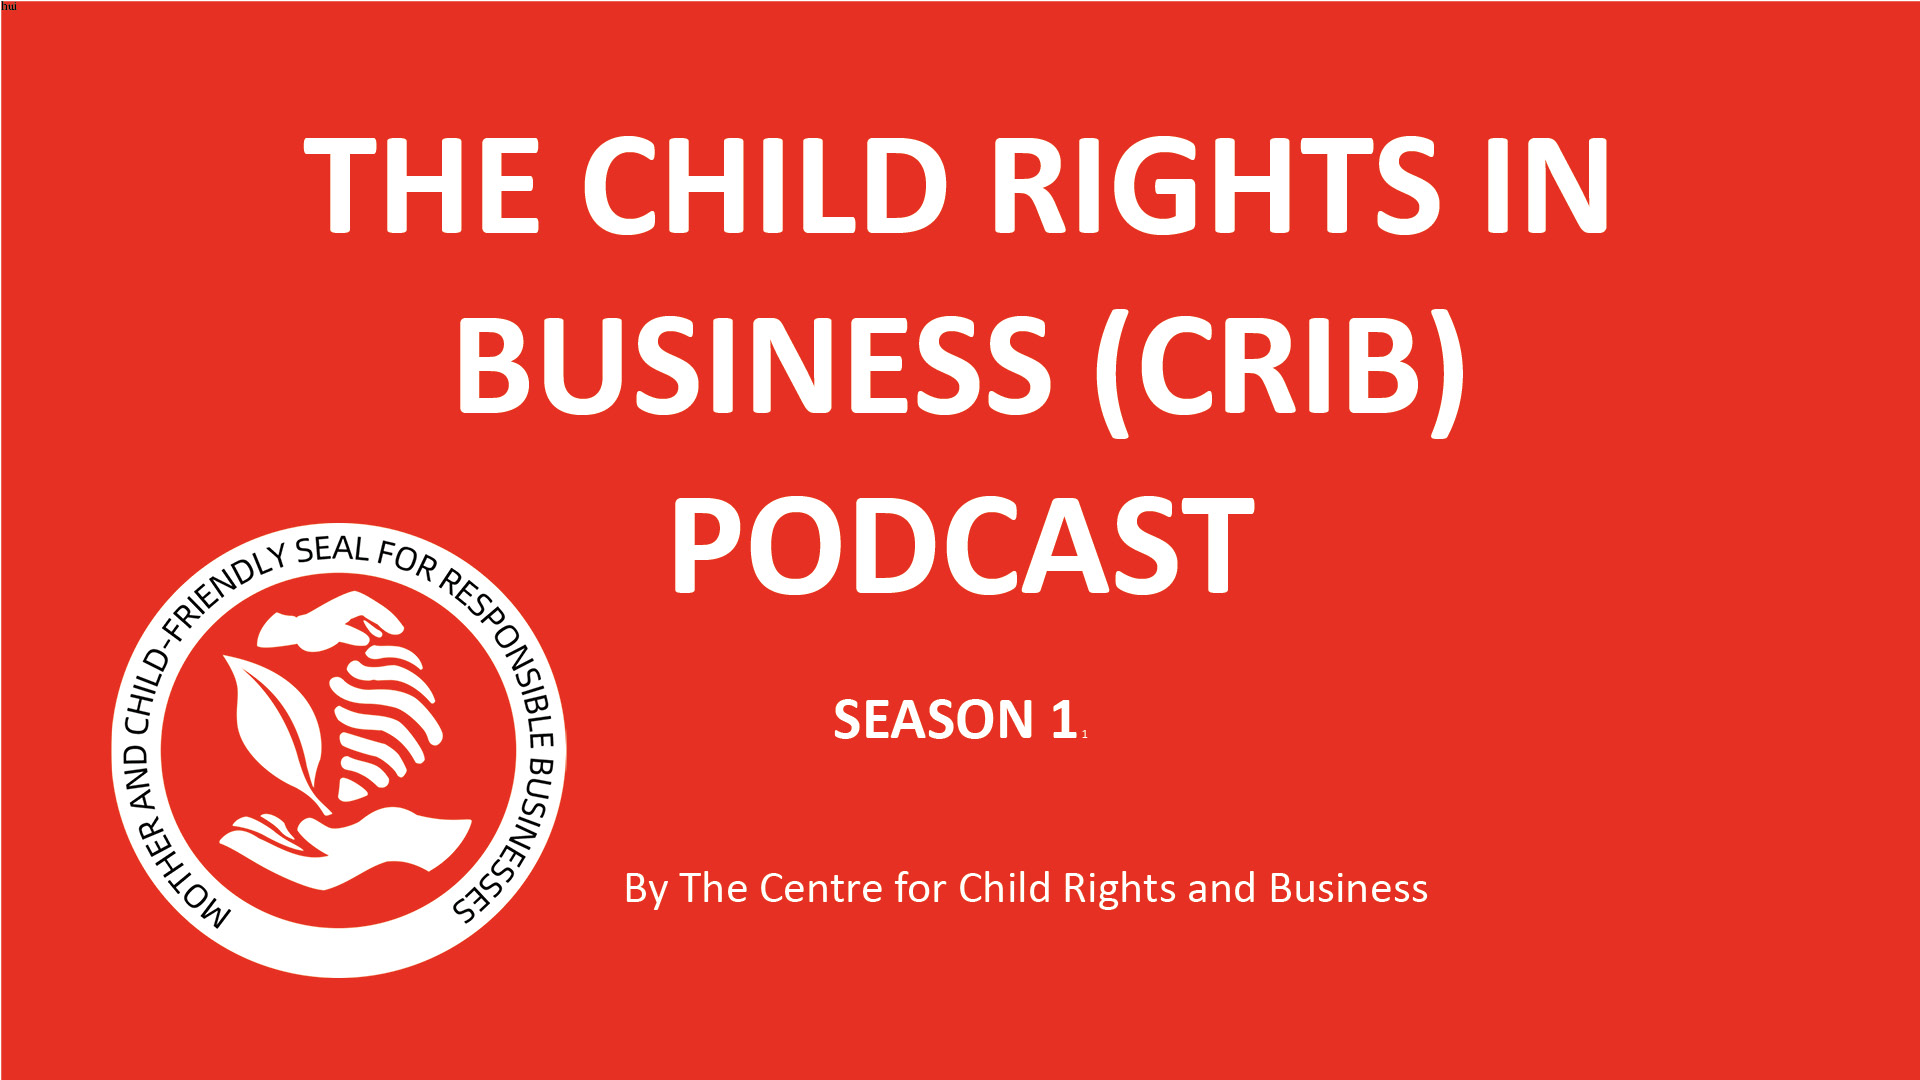 Introducing the Child Rights in Business (CRIB) Podcast